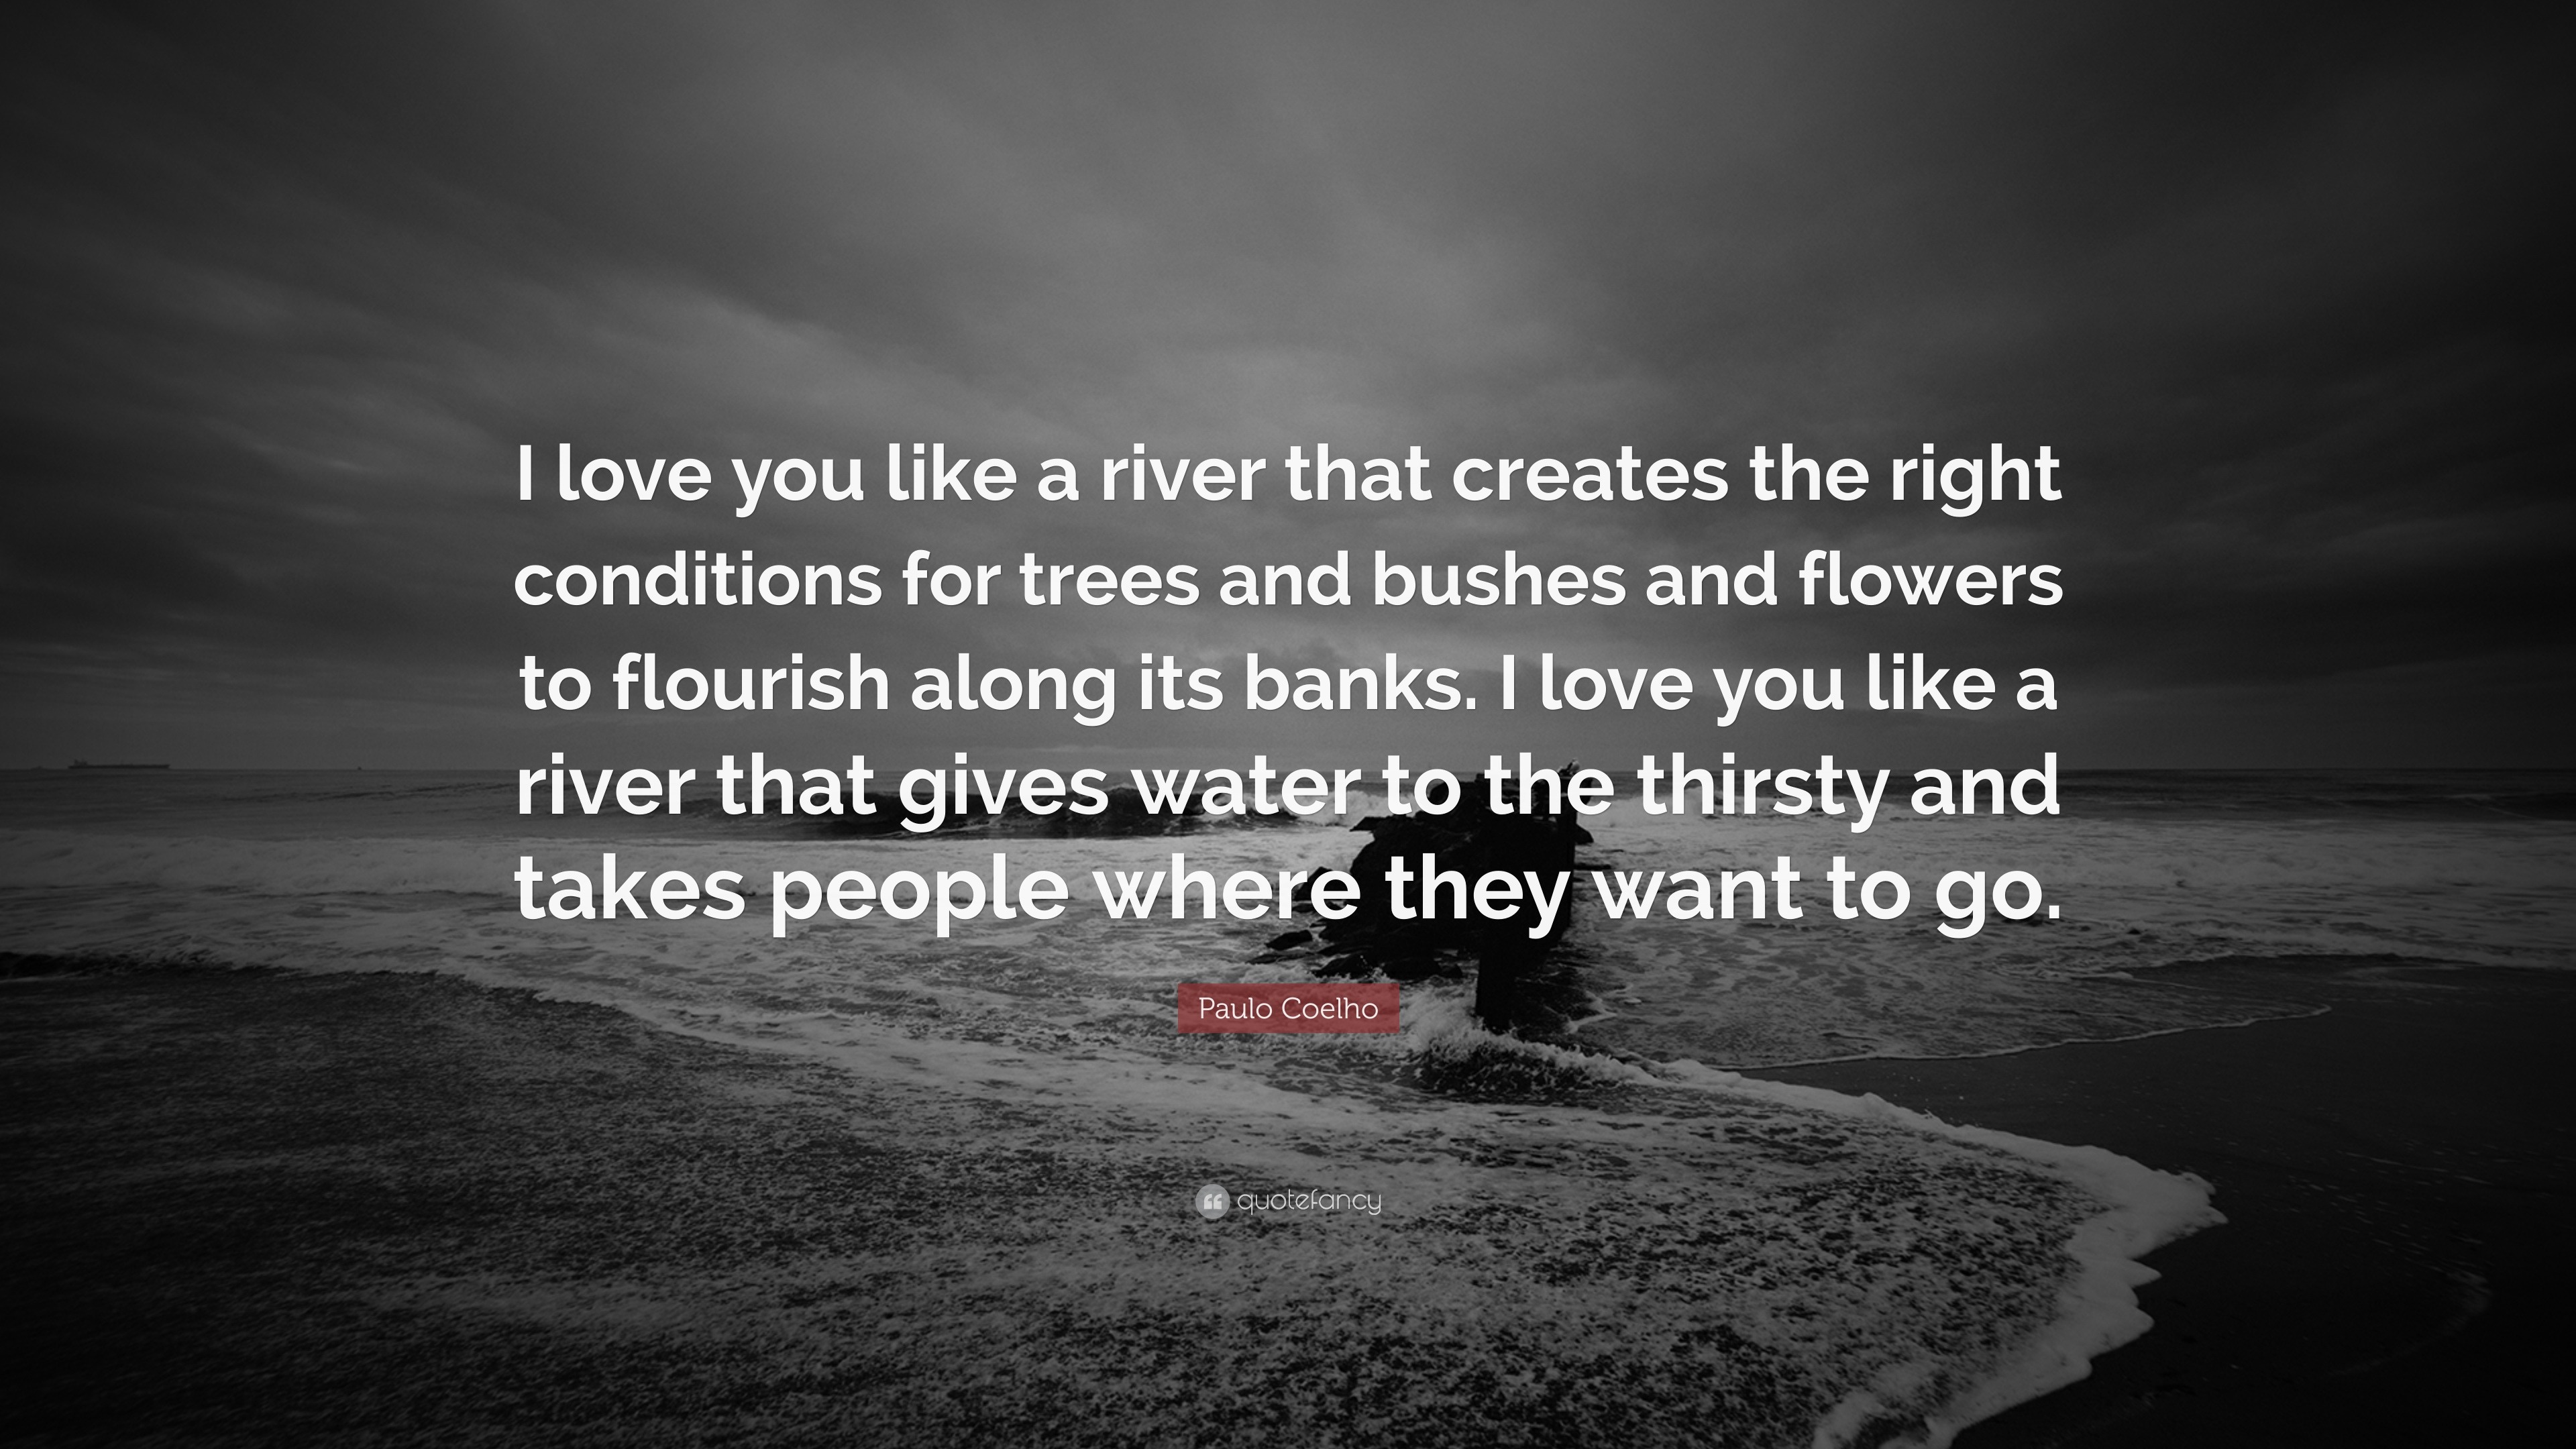 Paulo Coelho Quote “I love you like a river that creates the right conditions